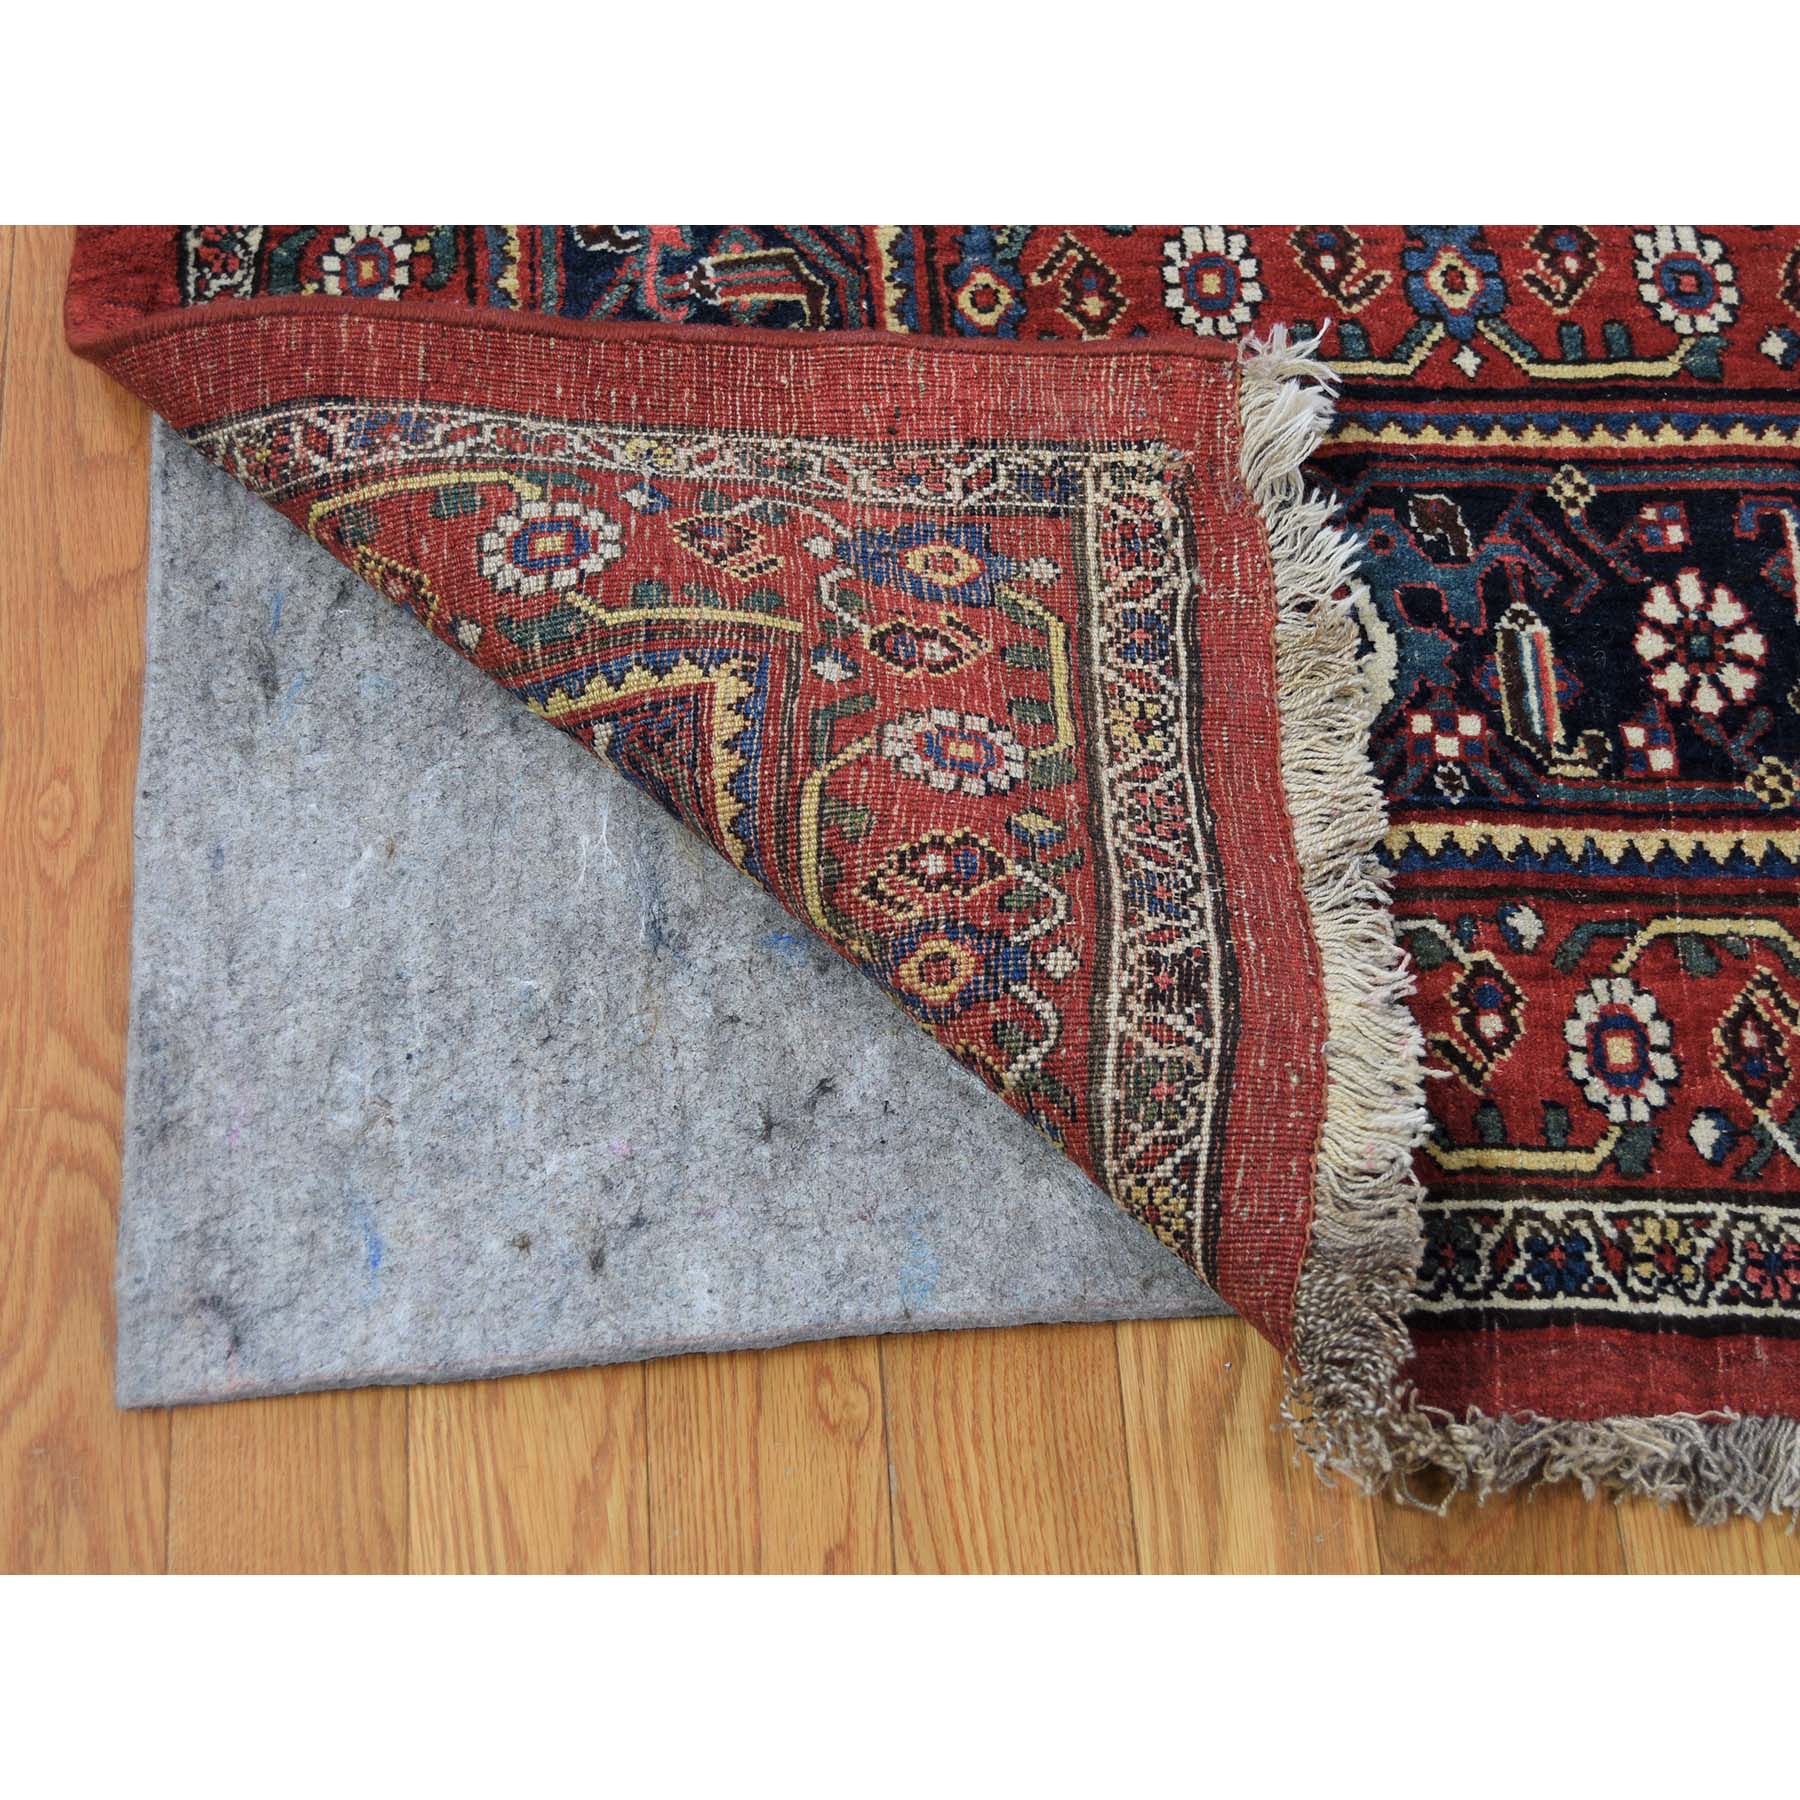 14-6 x19- Antique Persian Bijar Pure Wool Exc Condition Oversize Pure Wool Hand-Knotted Oriental Rug 